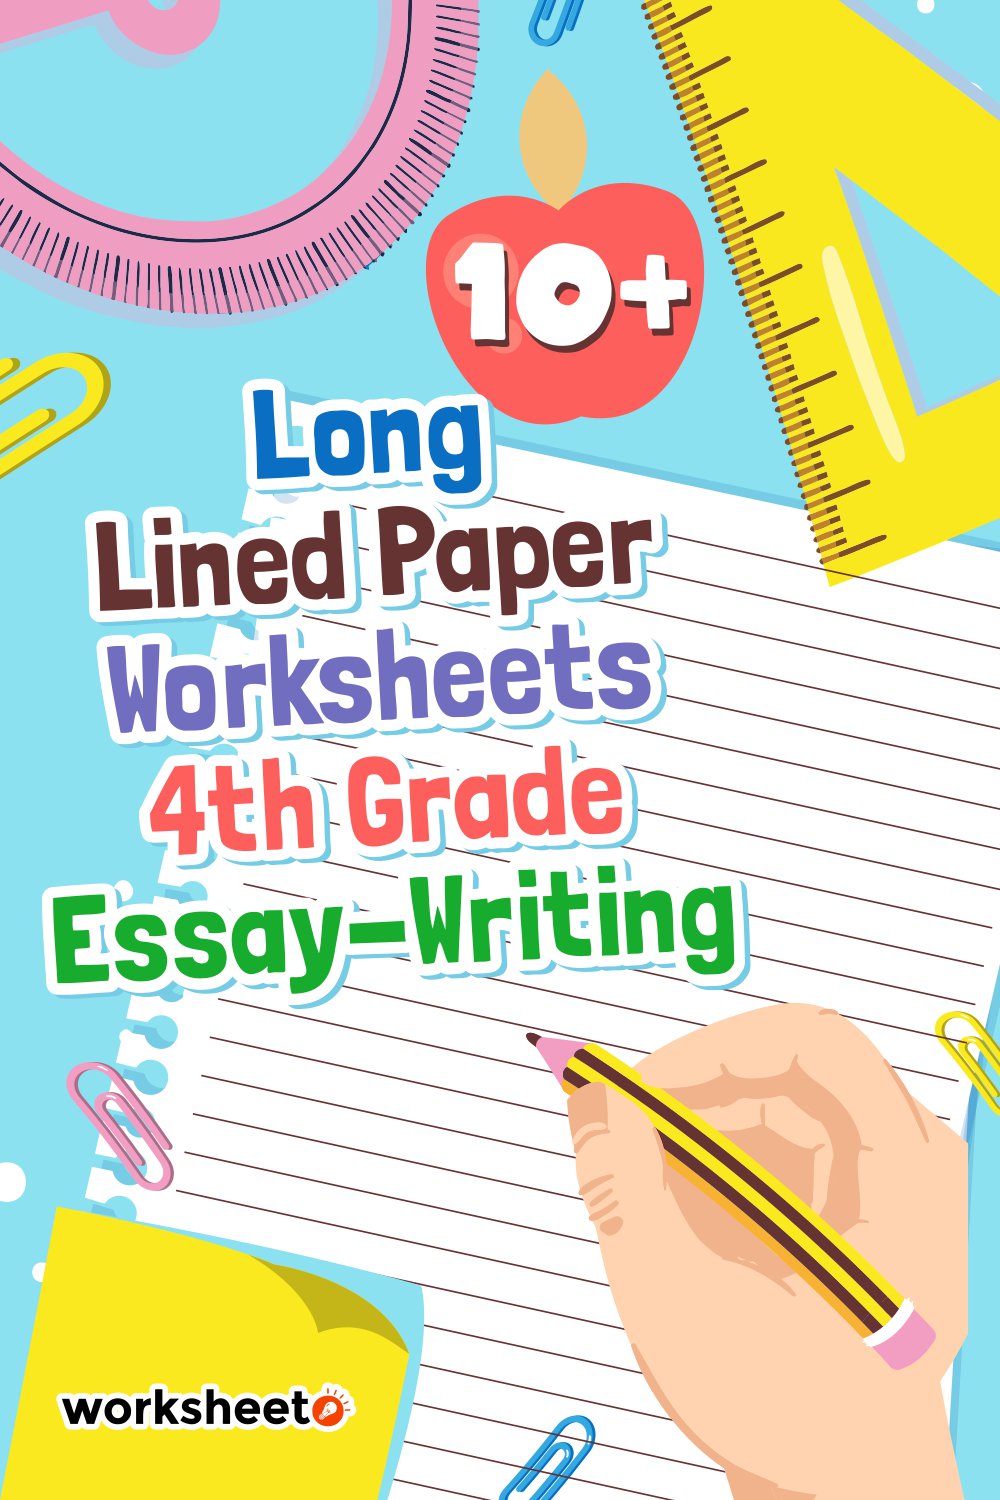 Long Lined Paper Worksheets 4th Grade Essay-Writing